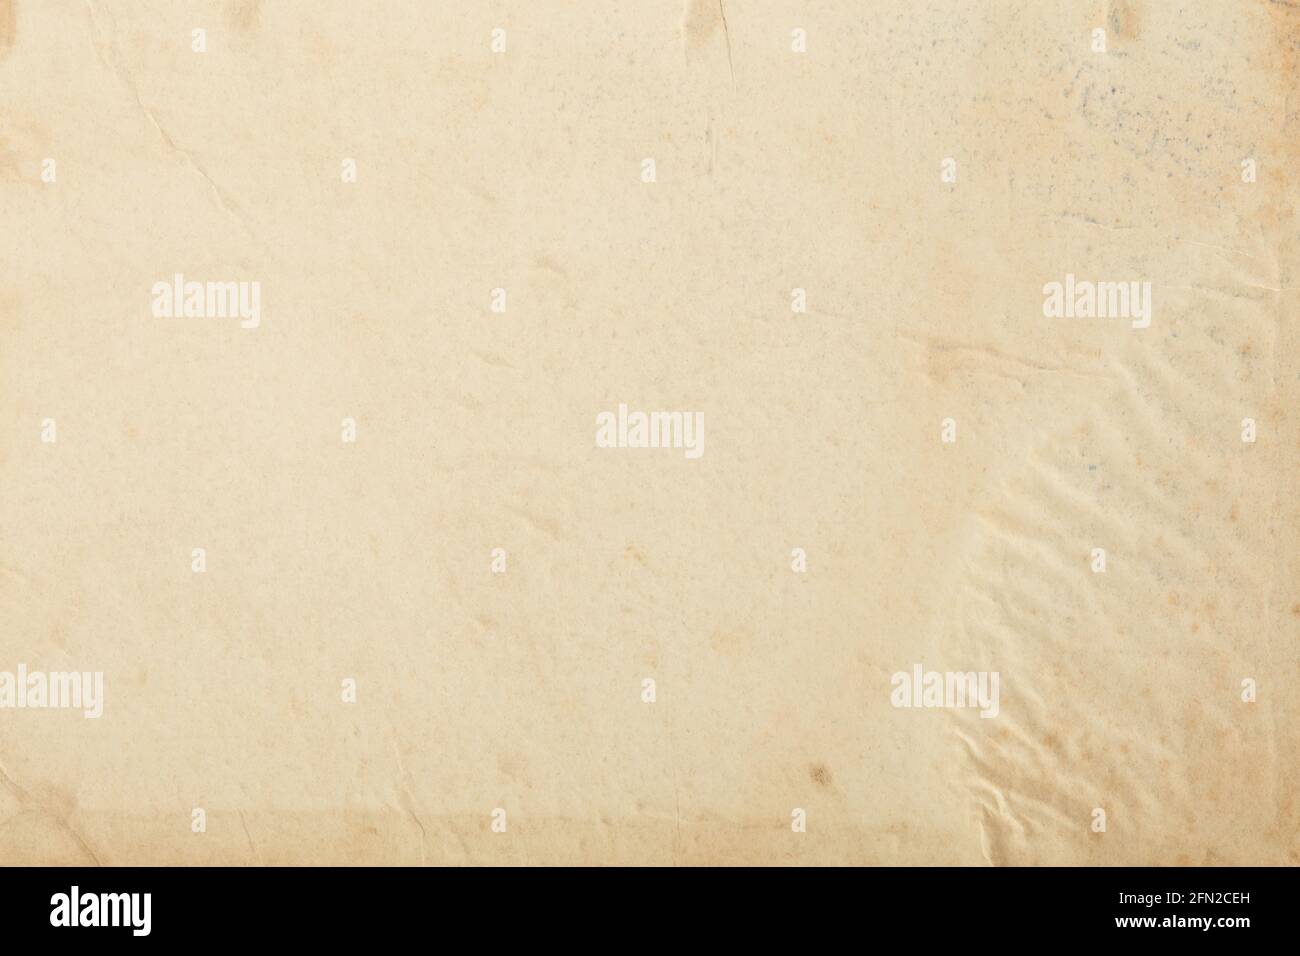 Old paper with stained part and humidity signs texture background Stock Photo